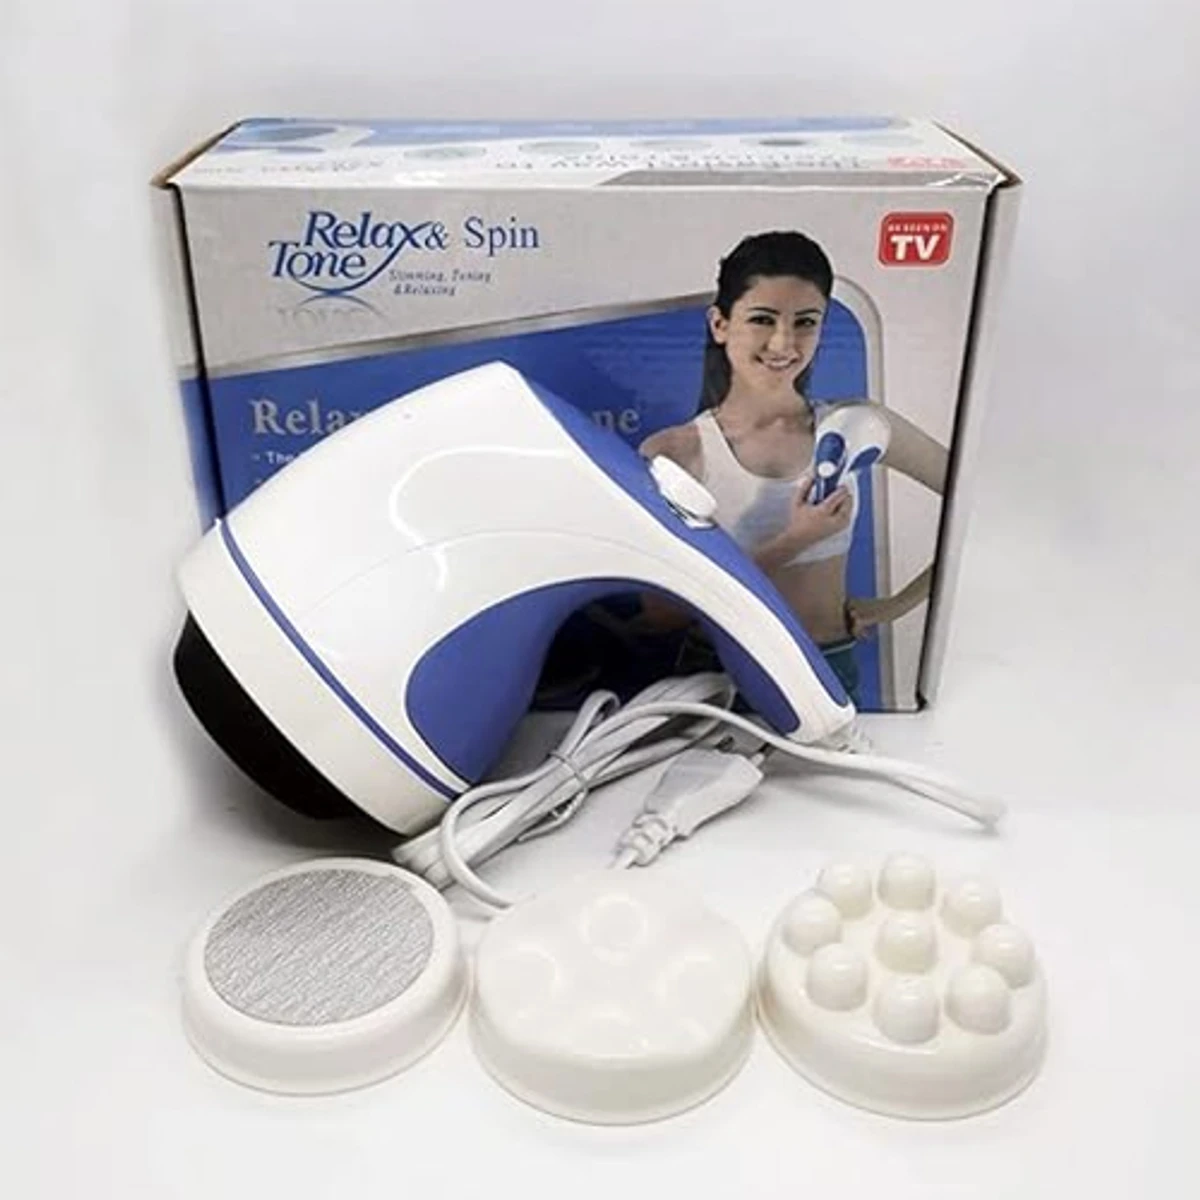 Relax & Spin Tone Hand-held Full Body Massager